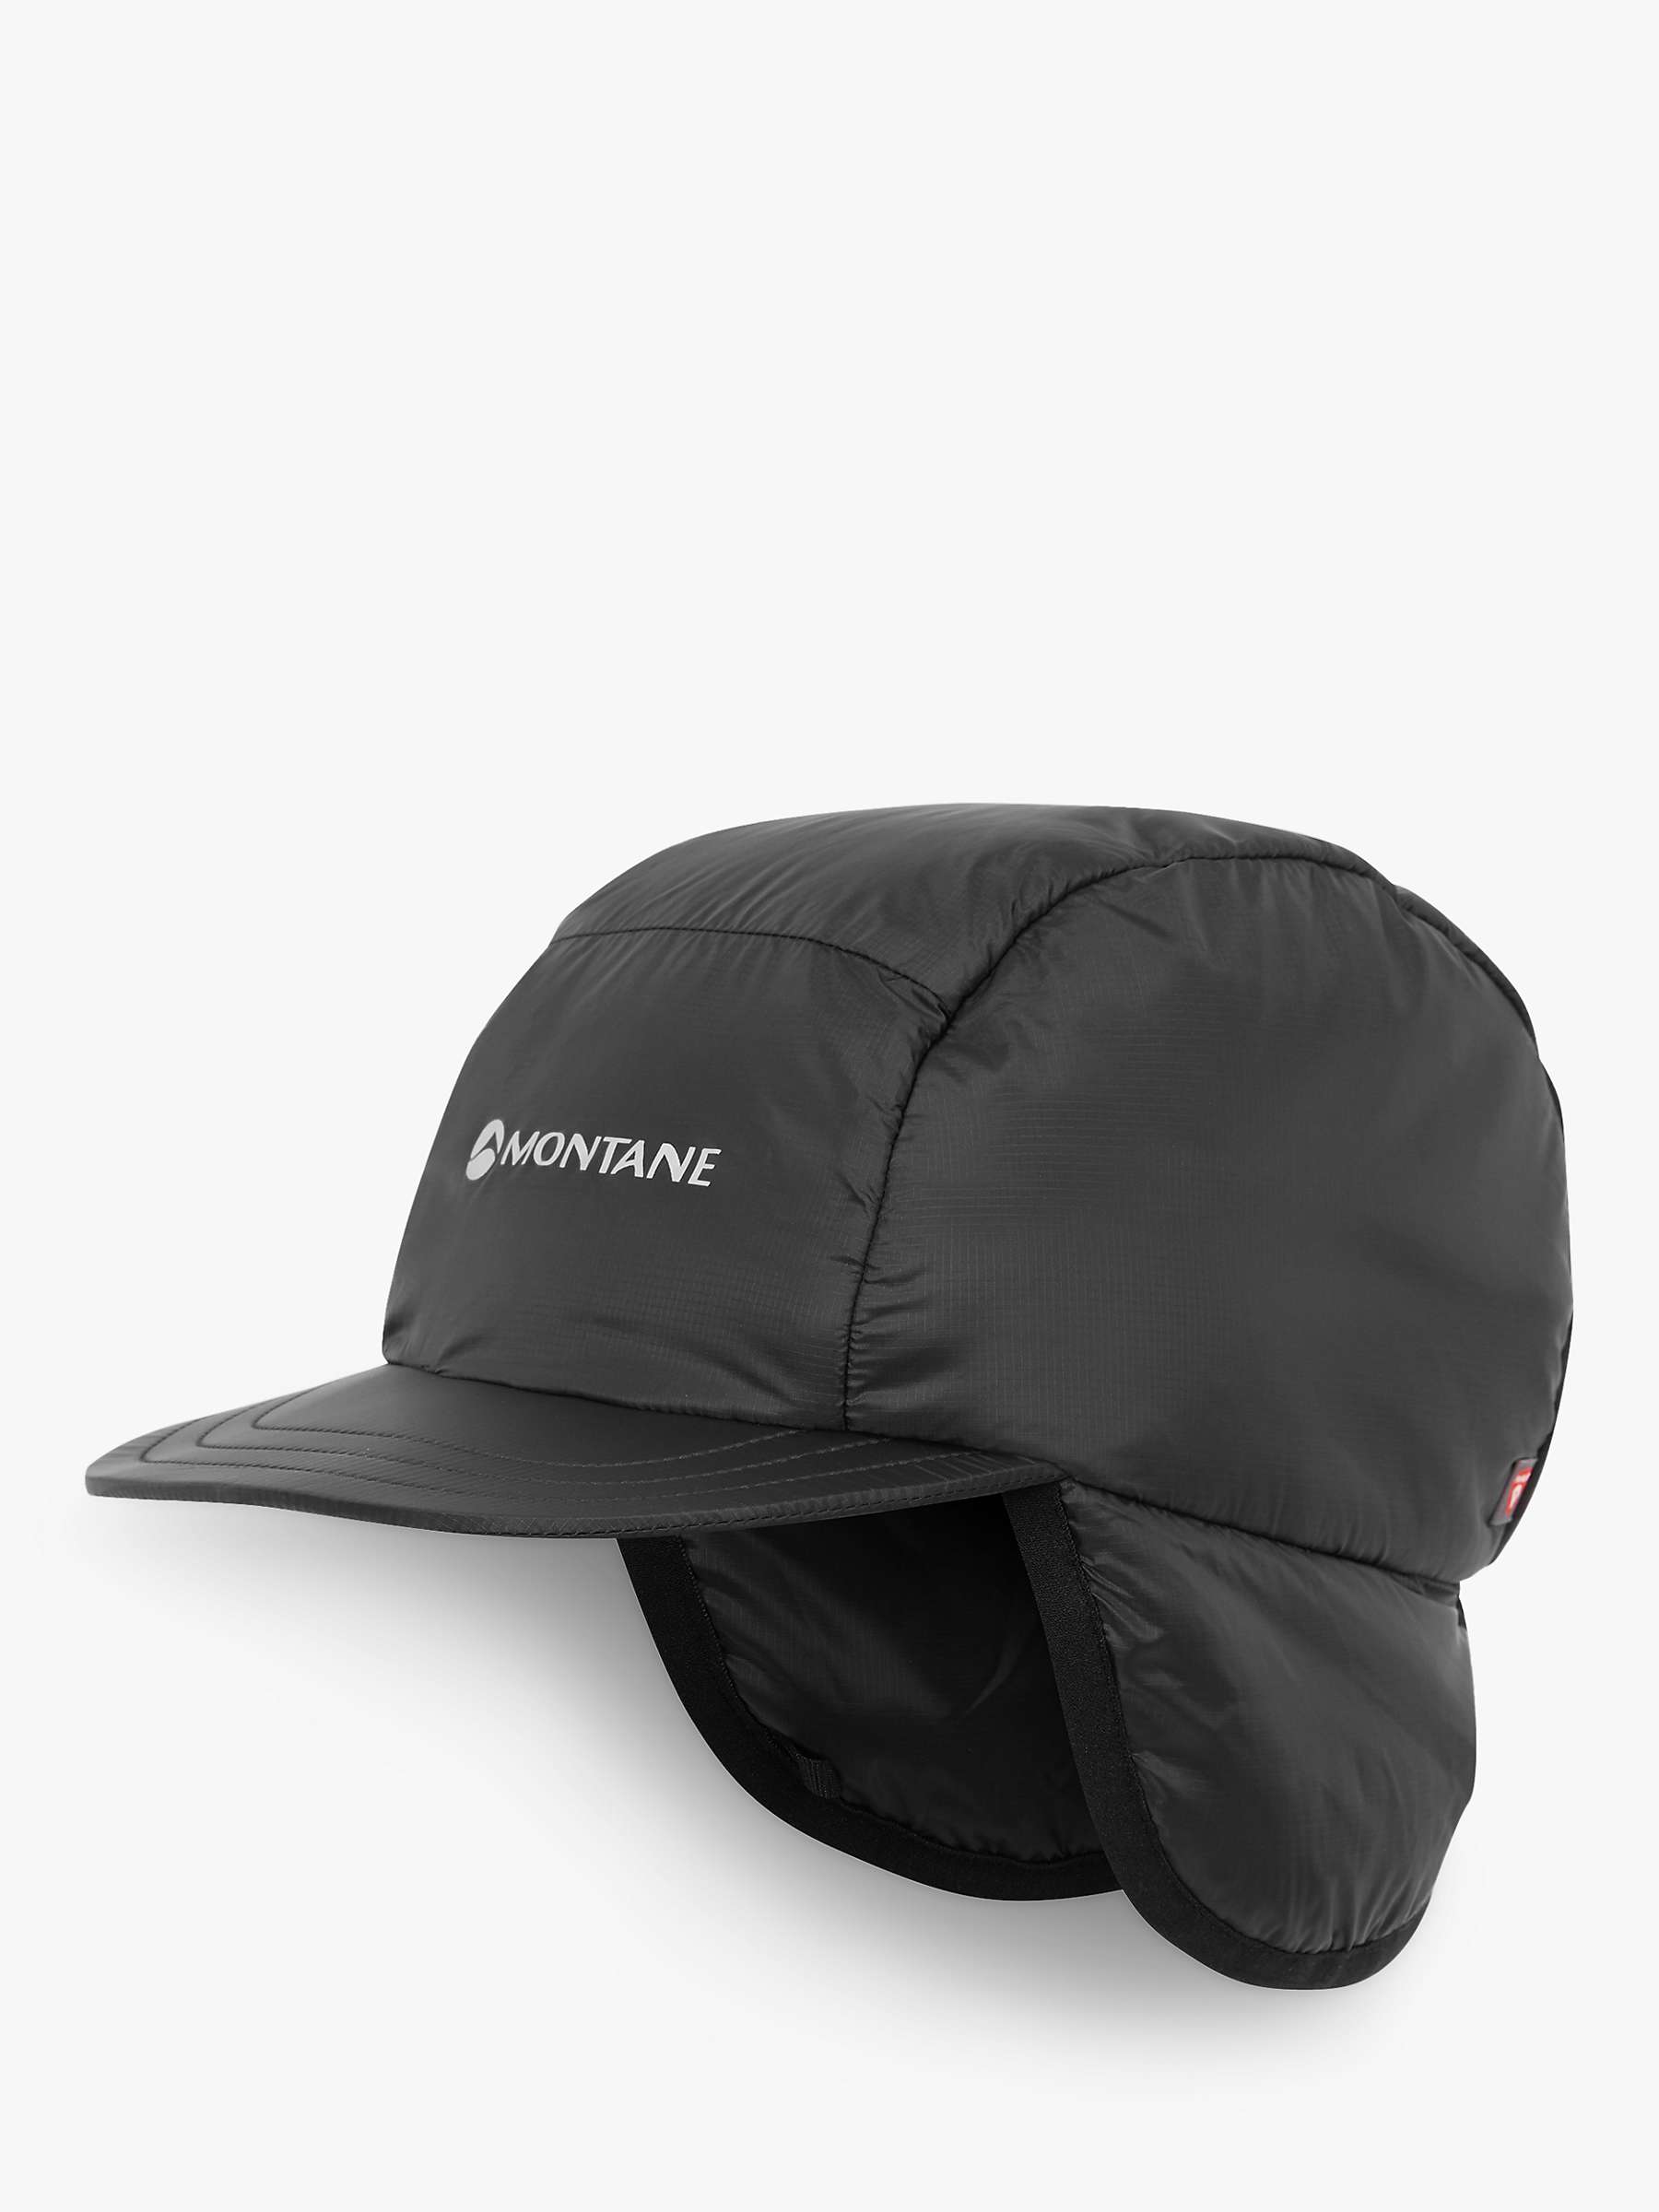 Buy Montane Insulated Mountain Cap Online at johnlewis.com